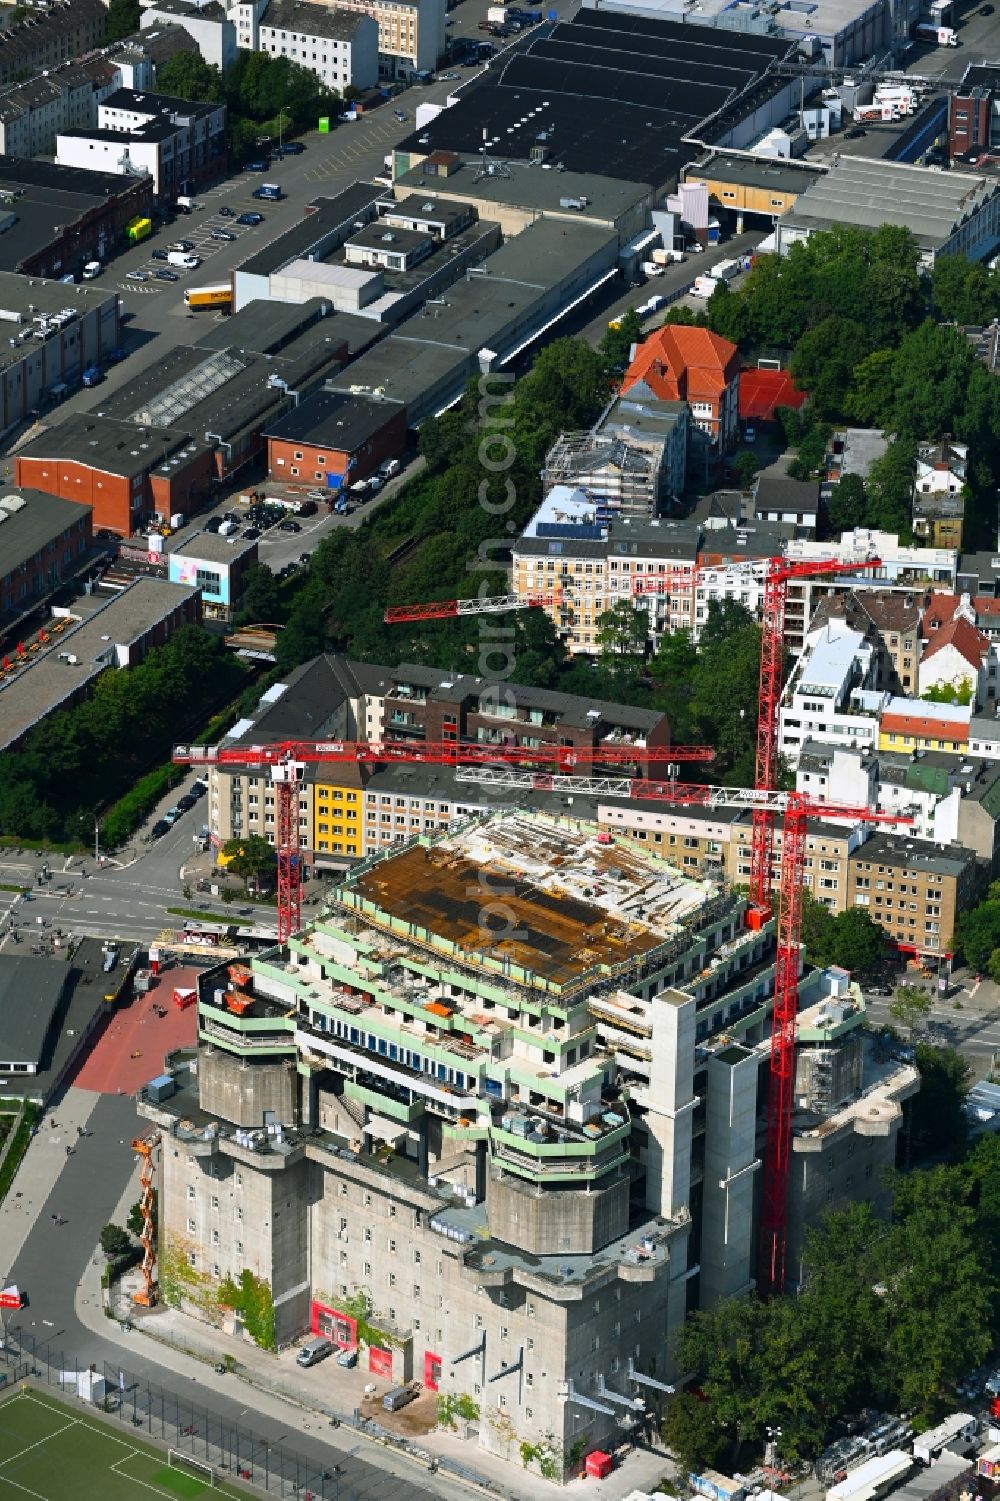 Aerial image Hamburg - Construction site on Bunker building complex made of concrete and steel Medienbunker or Hamburger Flaktuerme on Feldstrasse in the district Sankt Pauli in Hamburg, Germany